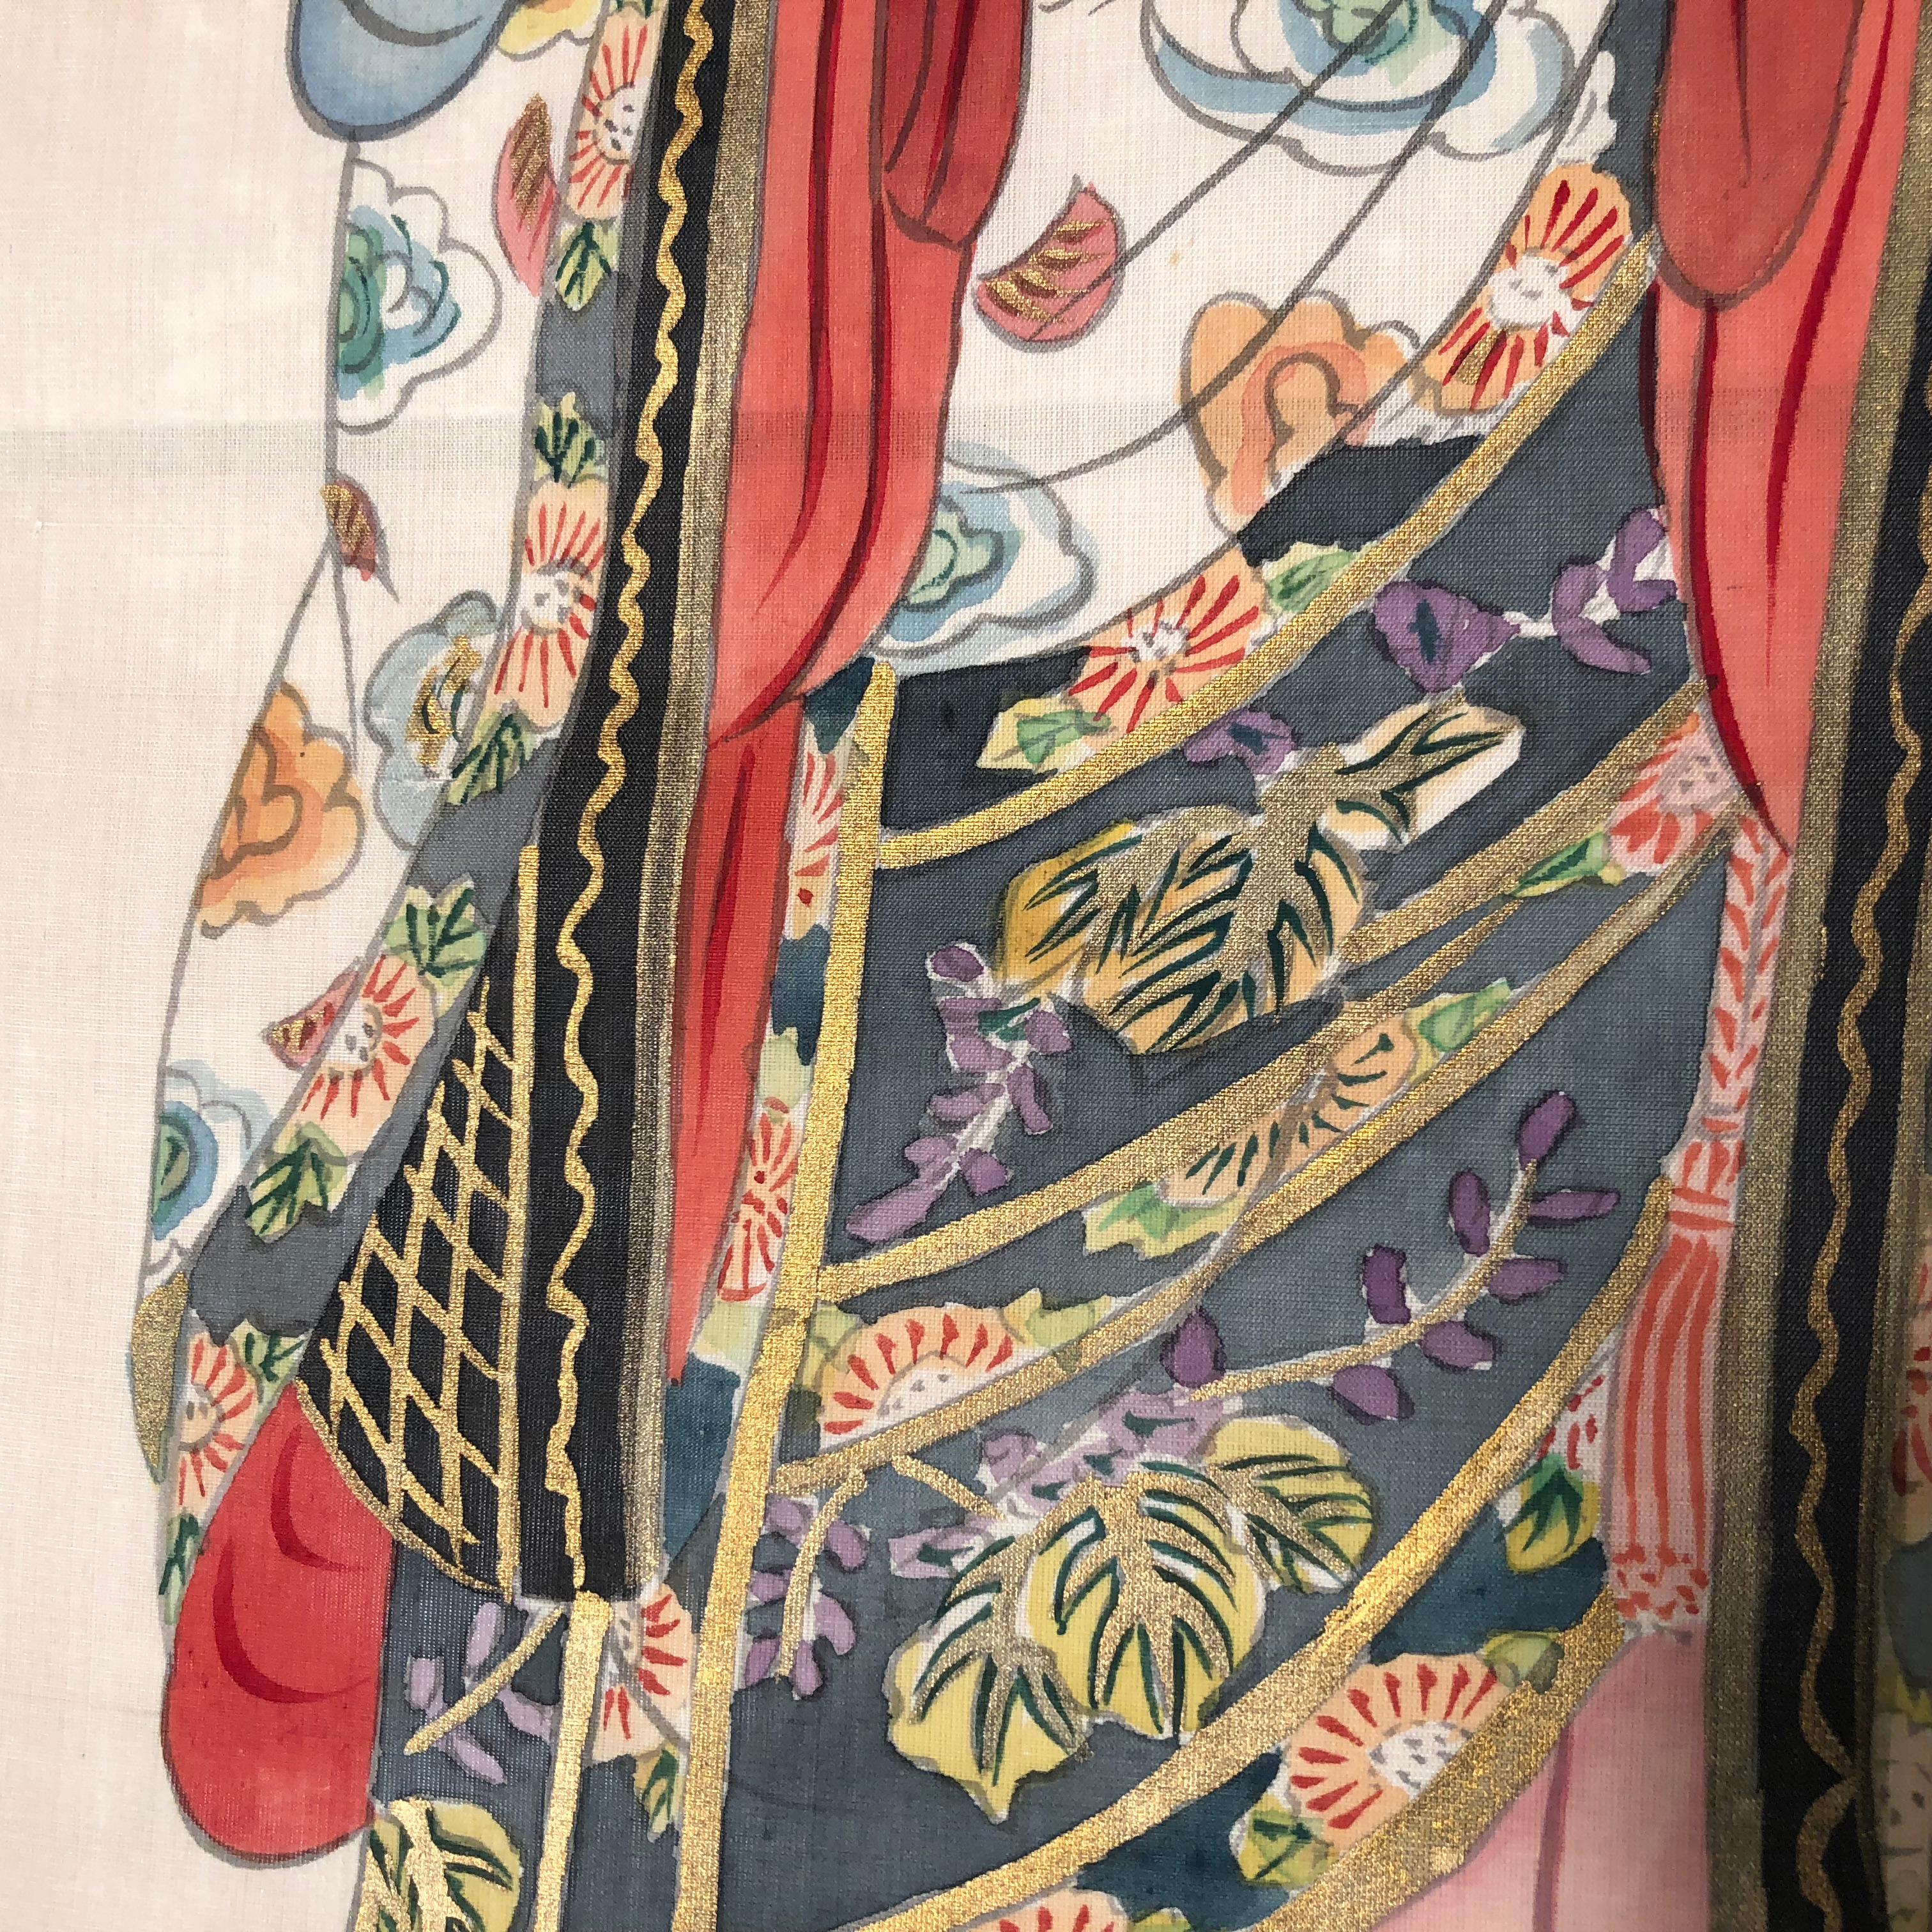 Japanese Antique Hand-Painted Silk Painting Guan Yin 2